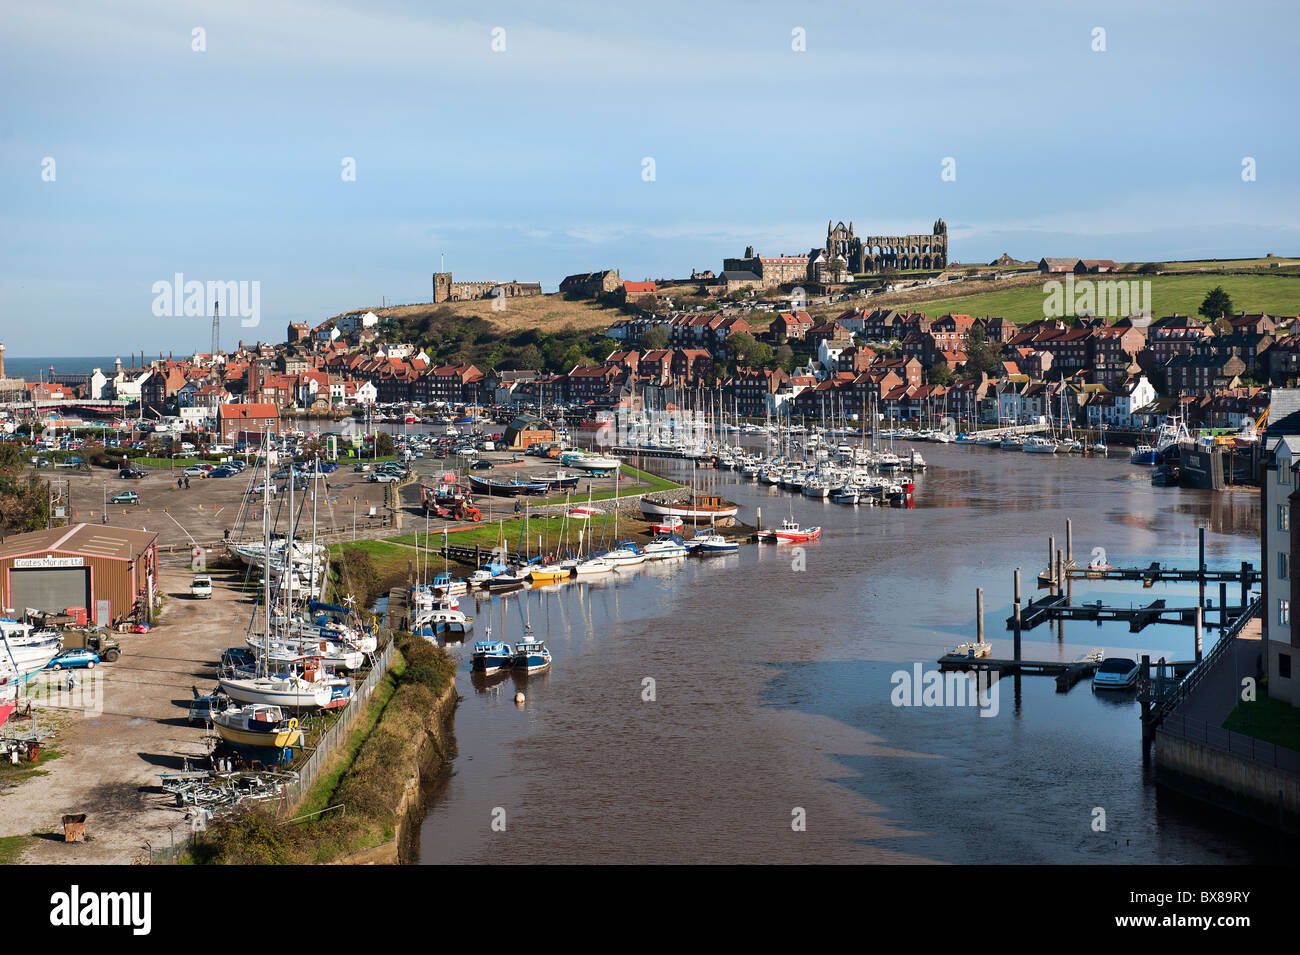 The River Esk Estuary at Whitby, North Yorkshire on a sunny day. There are many sailing and motor boats berthed on the river Esk here. It is sunny. Stock Photo